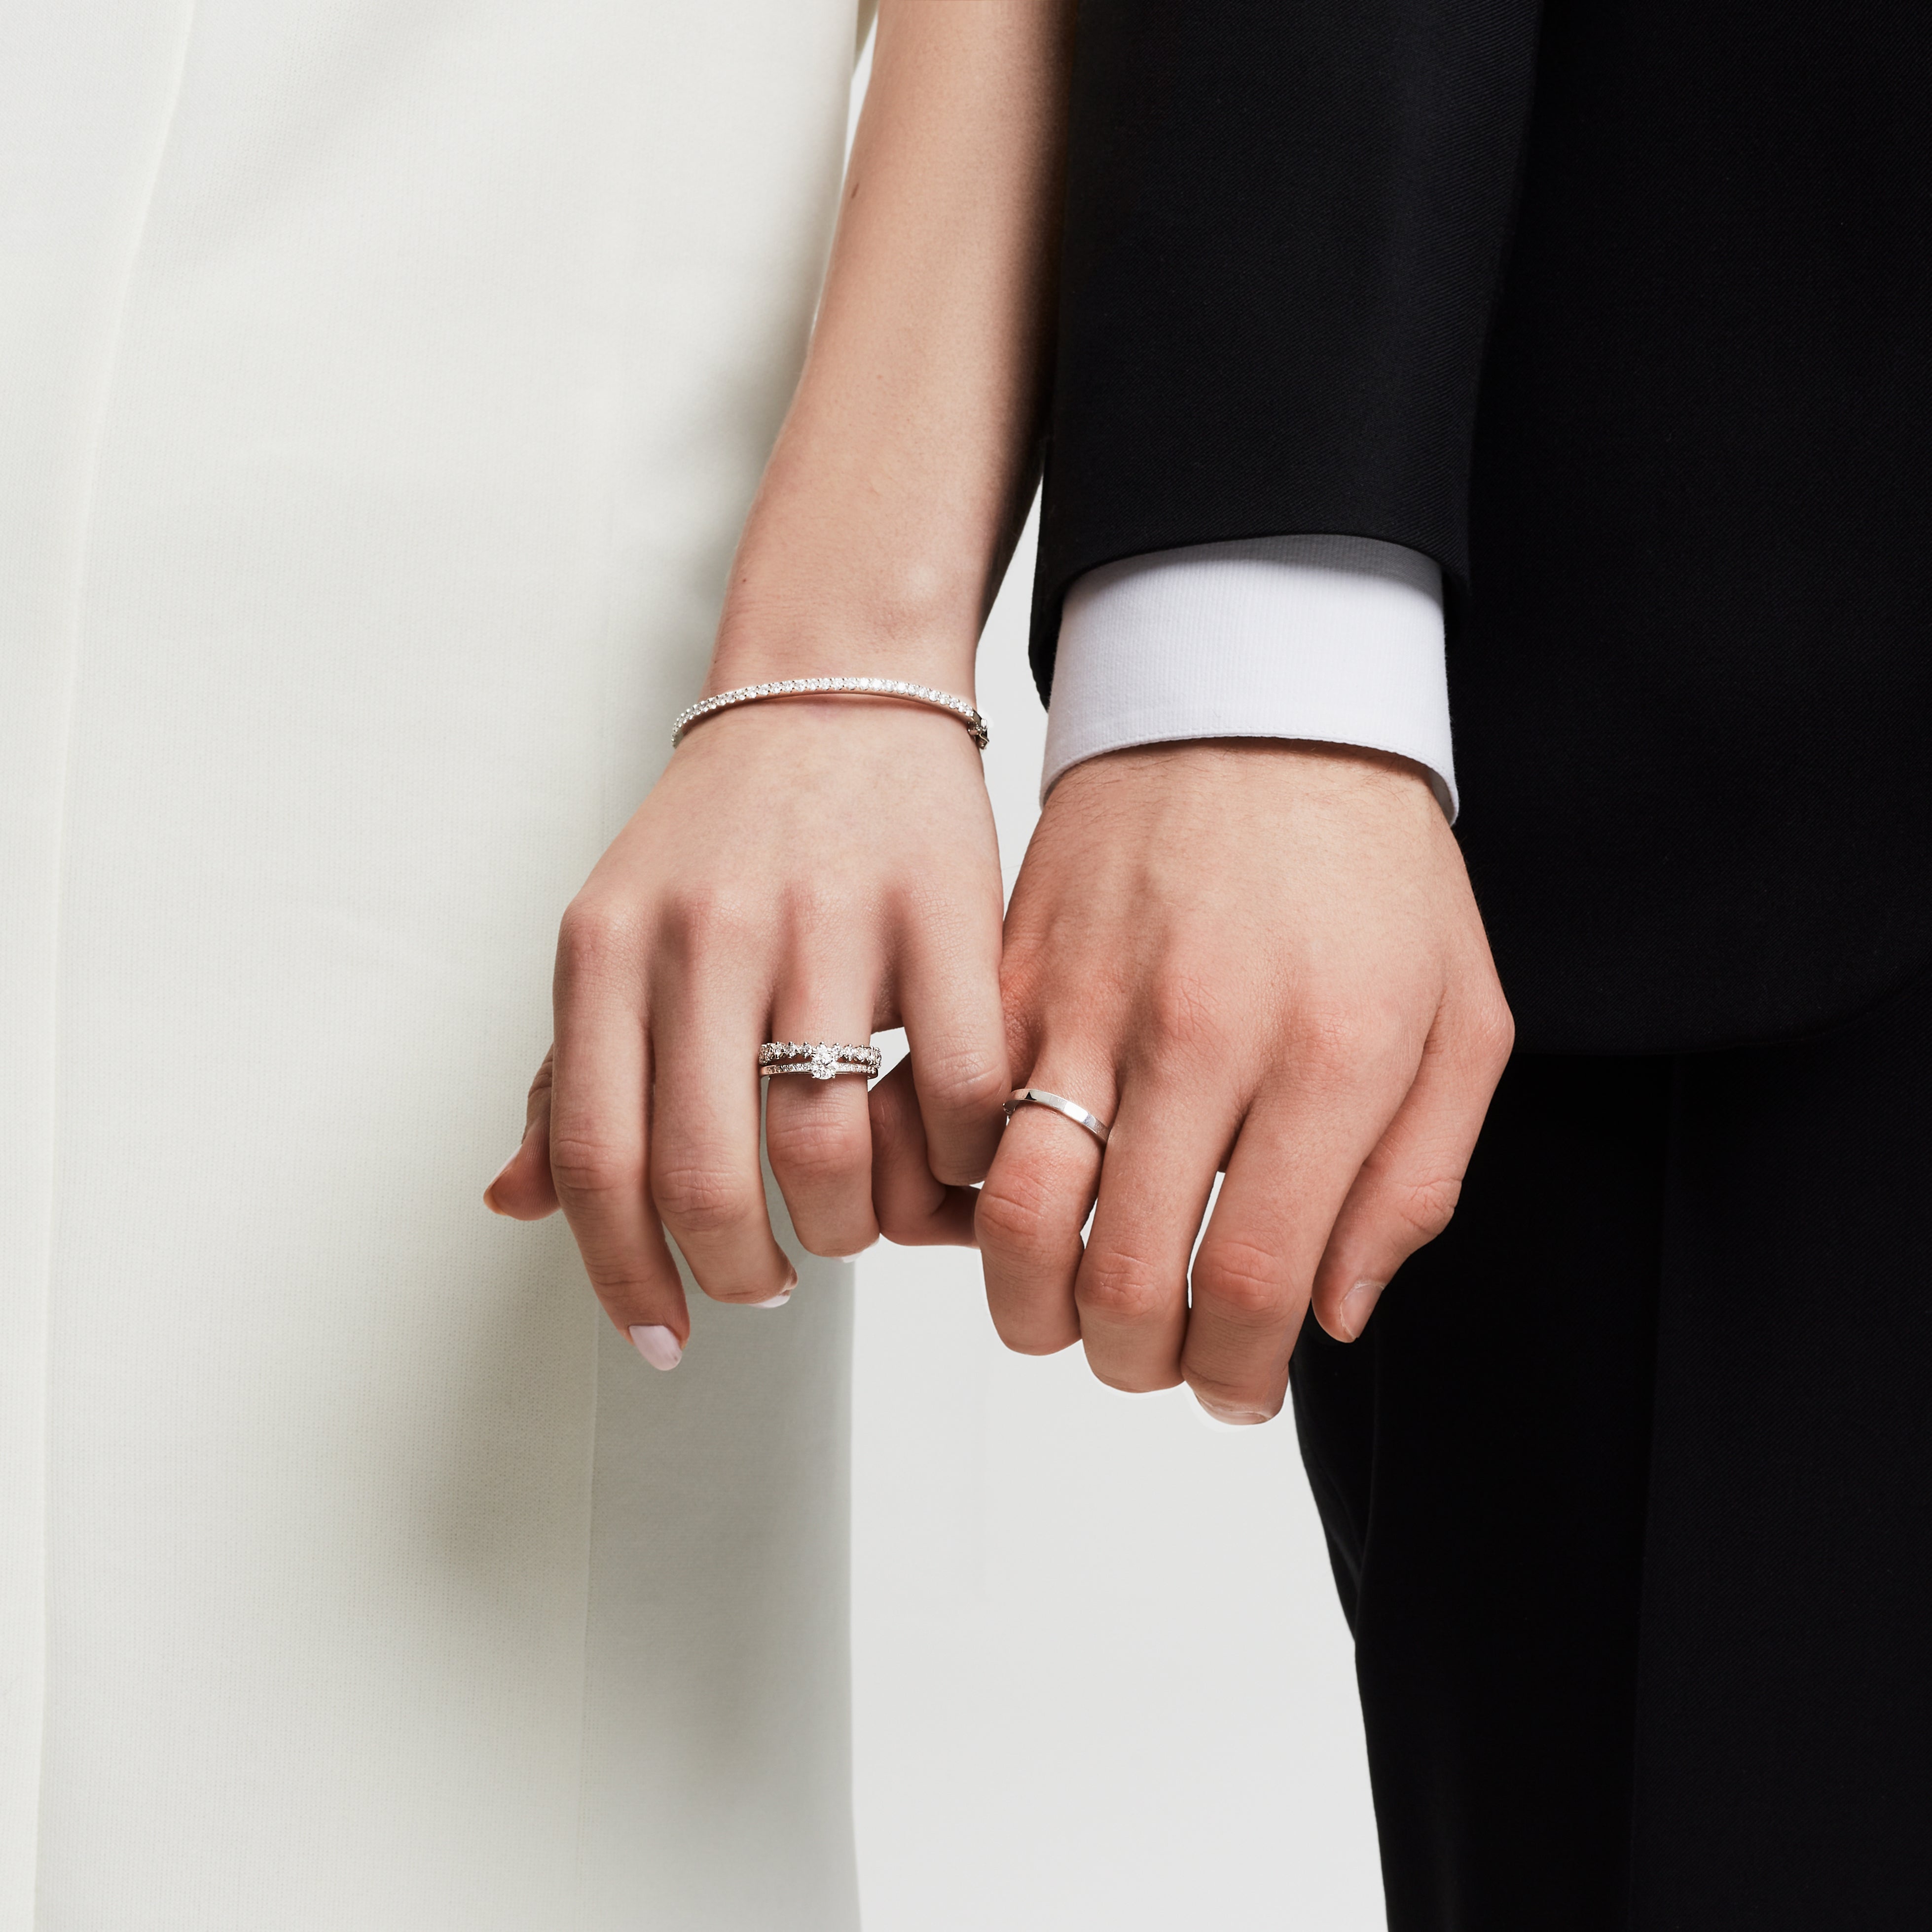 On Which Hand Should You Wear an Engagement Ring and Wedding Ring?